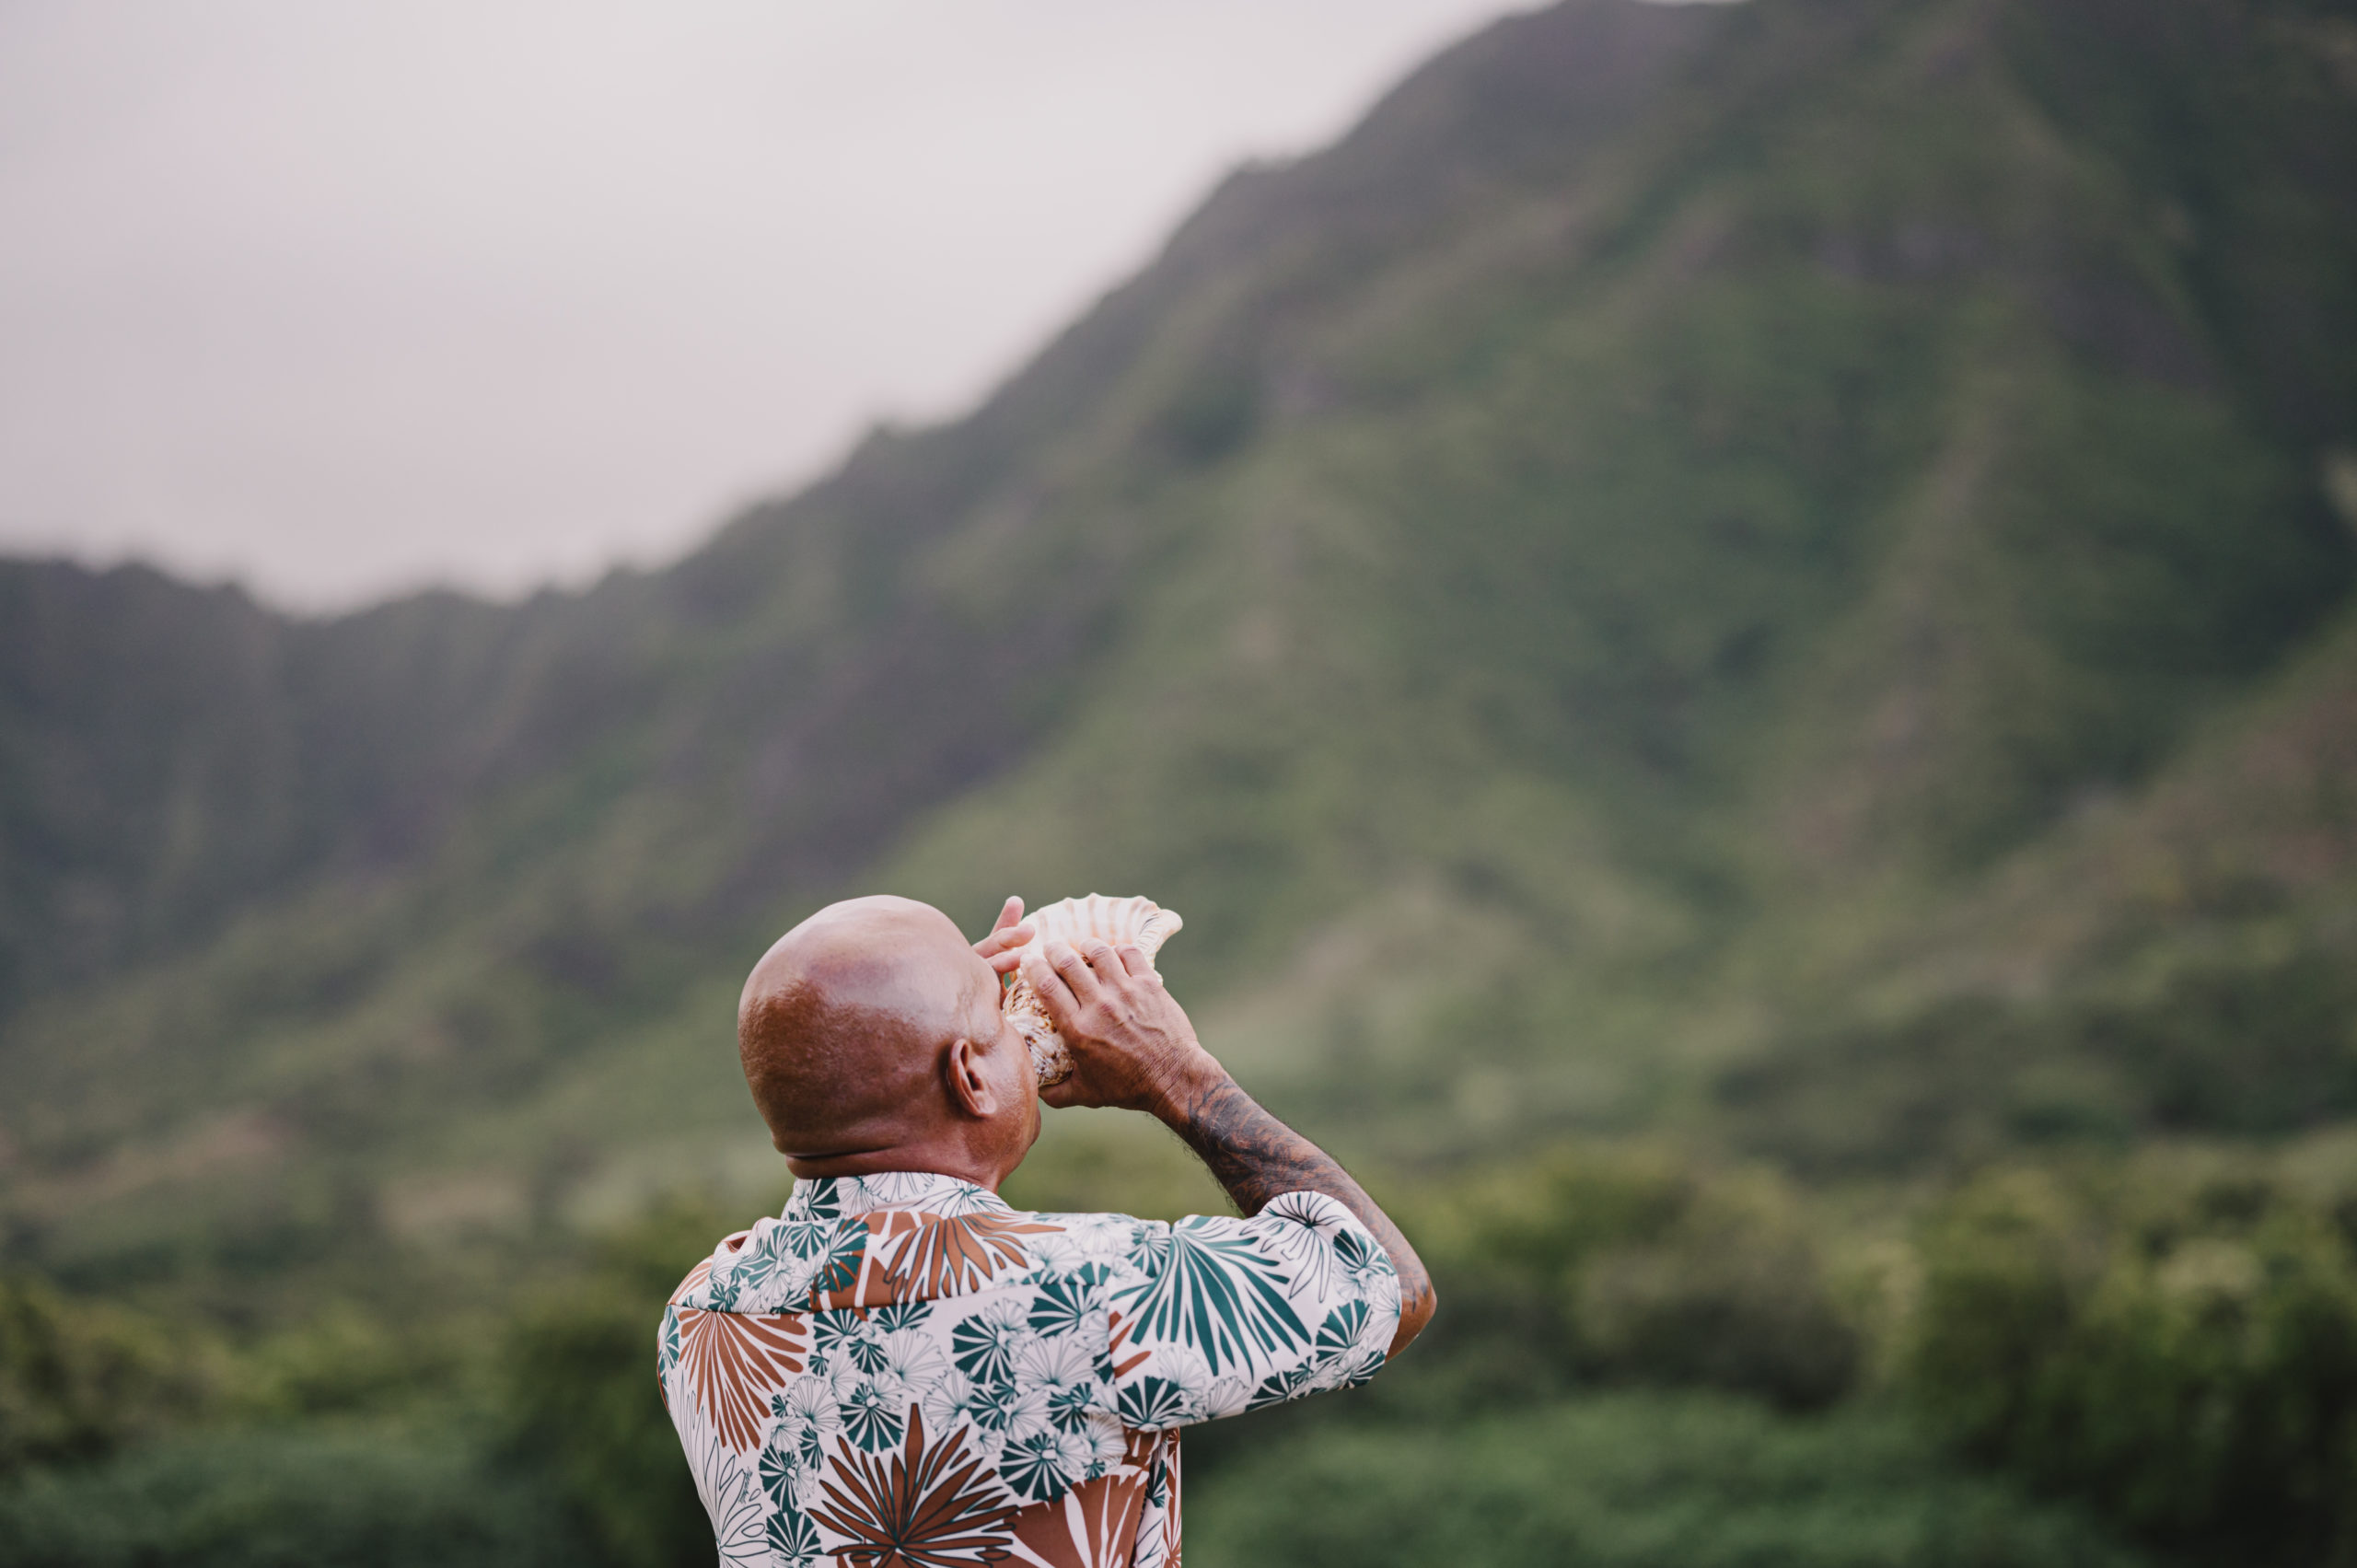 Unique Hawaiian conch shell-blowing tradition during the wedding ceremony L Hewitt Photography